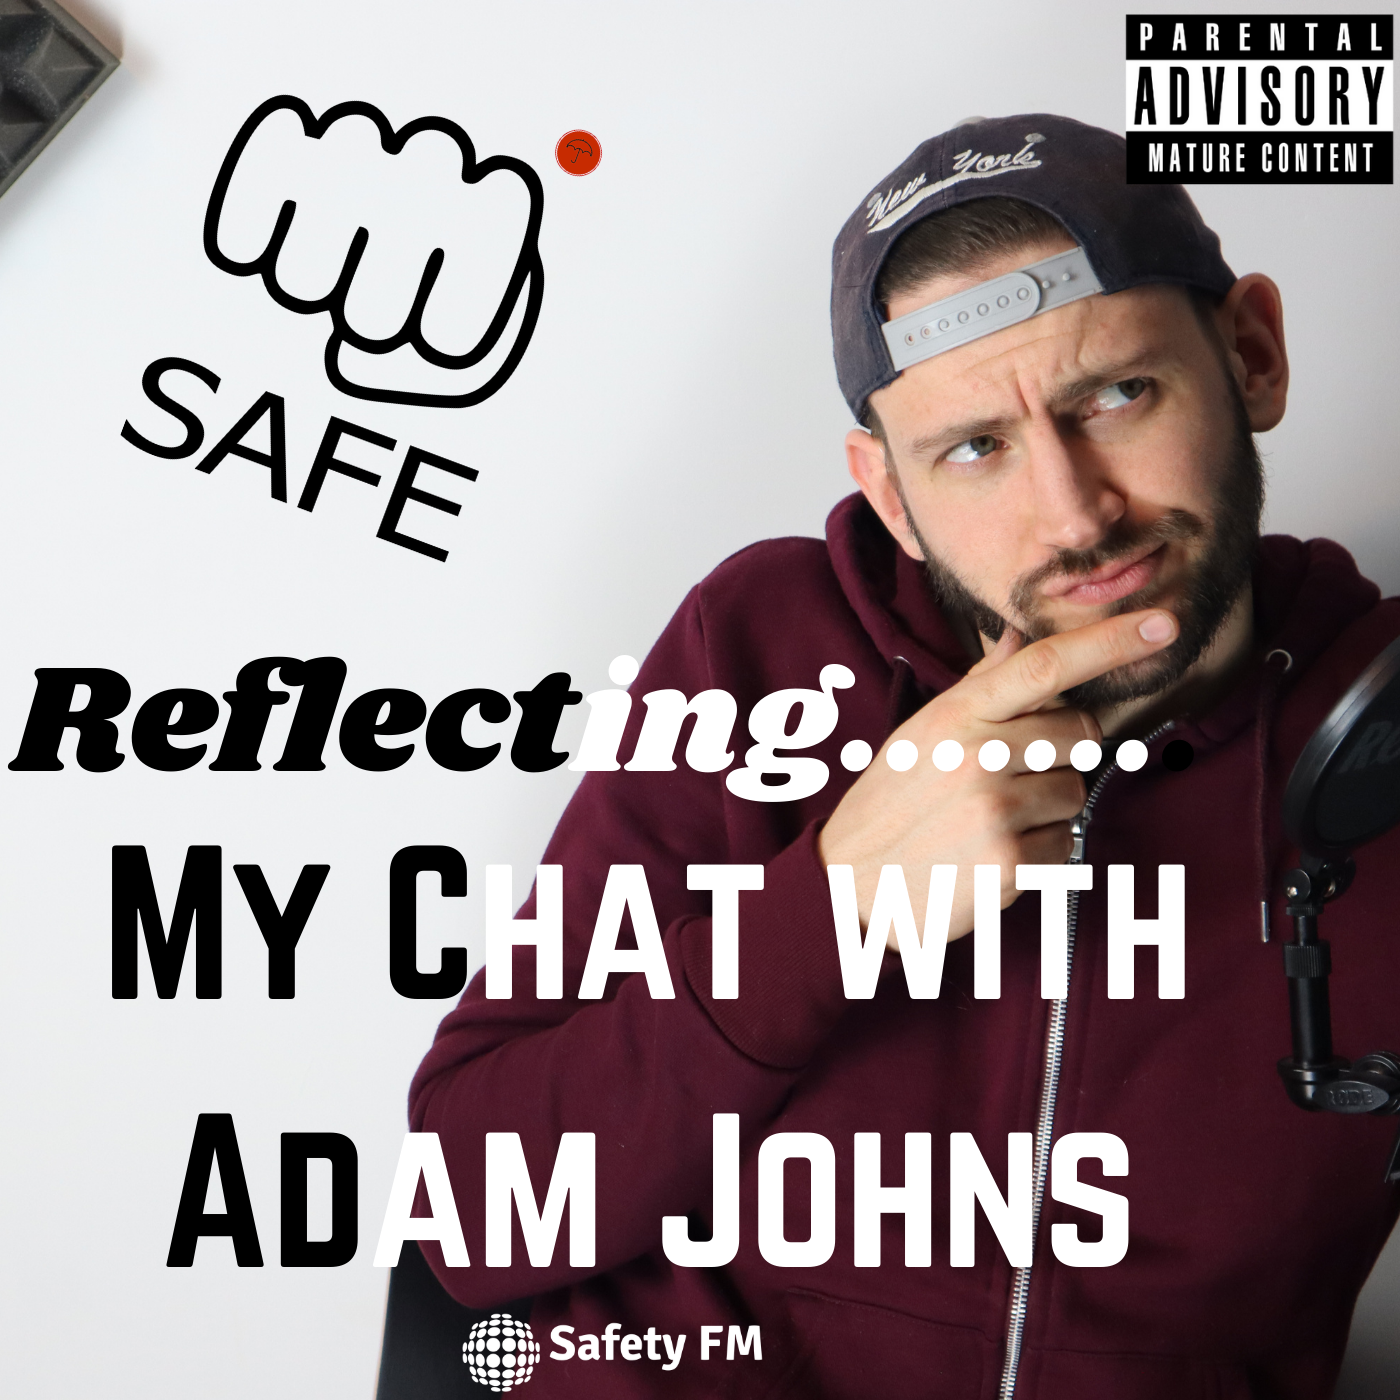 Reflecting on my chat with Adam Johns